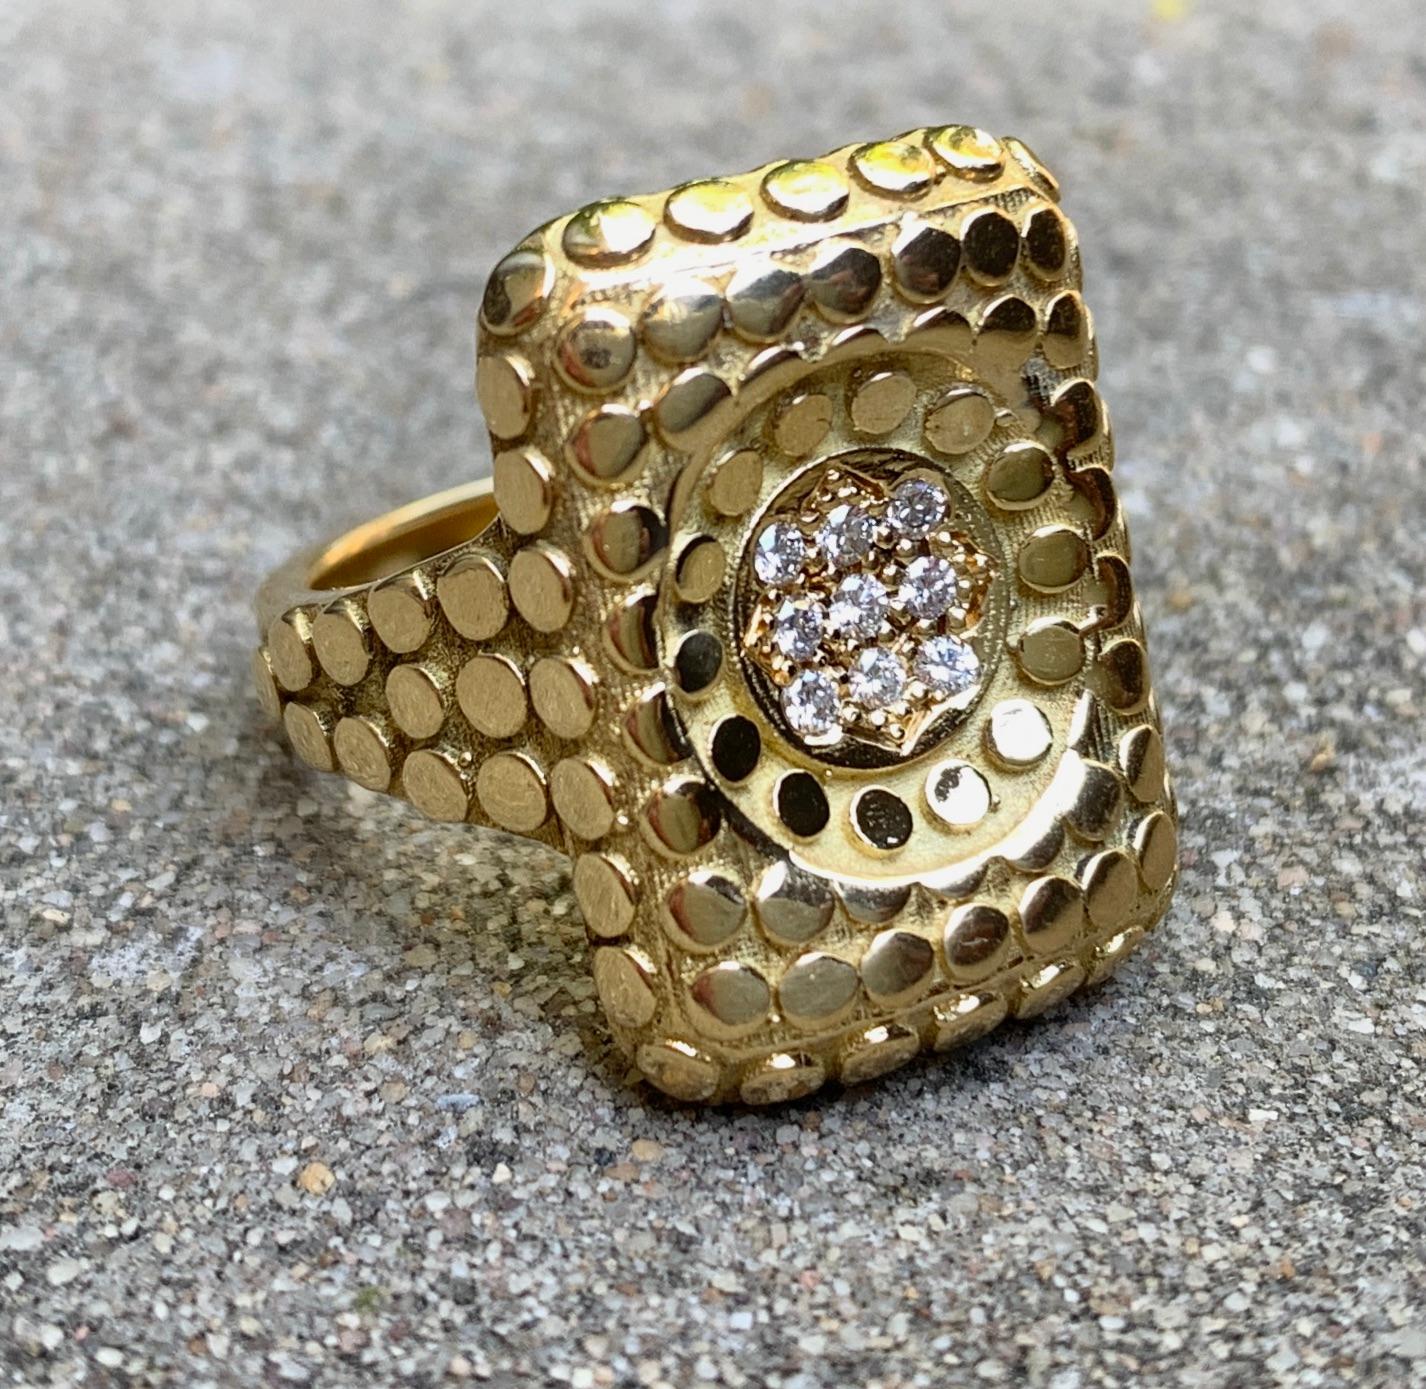 This gorgeous and commanding ring is a contoured rectangular slab featuring Eytan Brandes' 